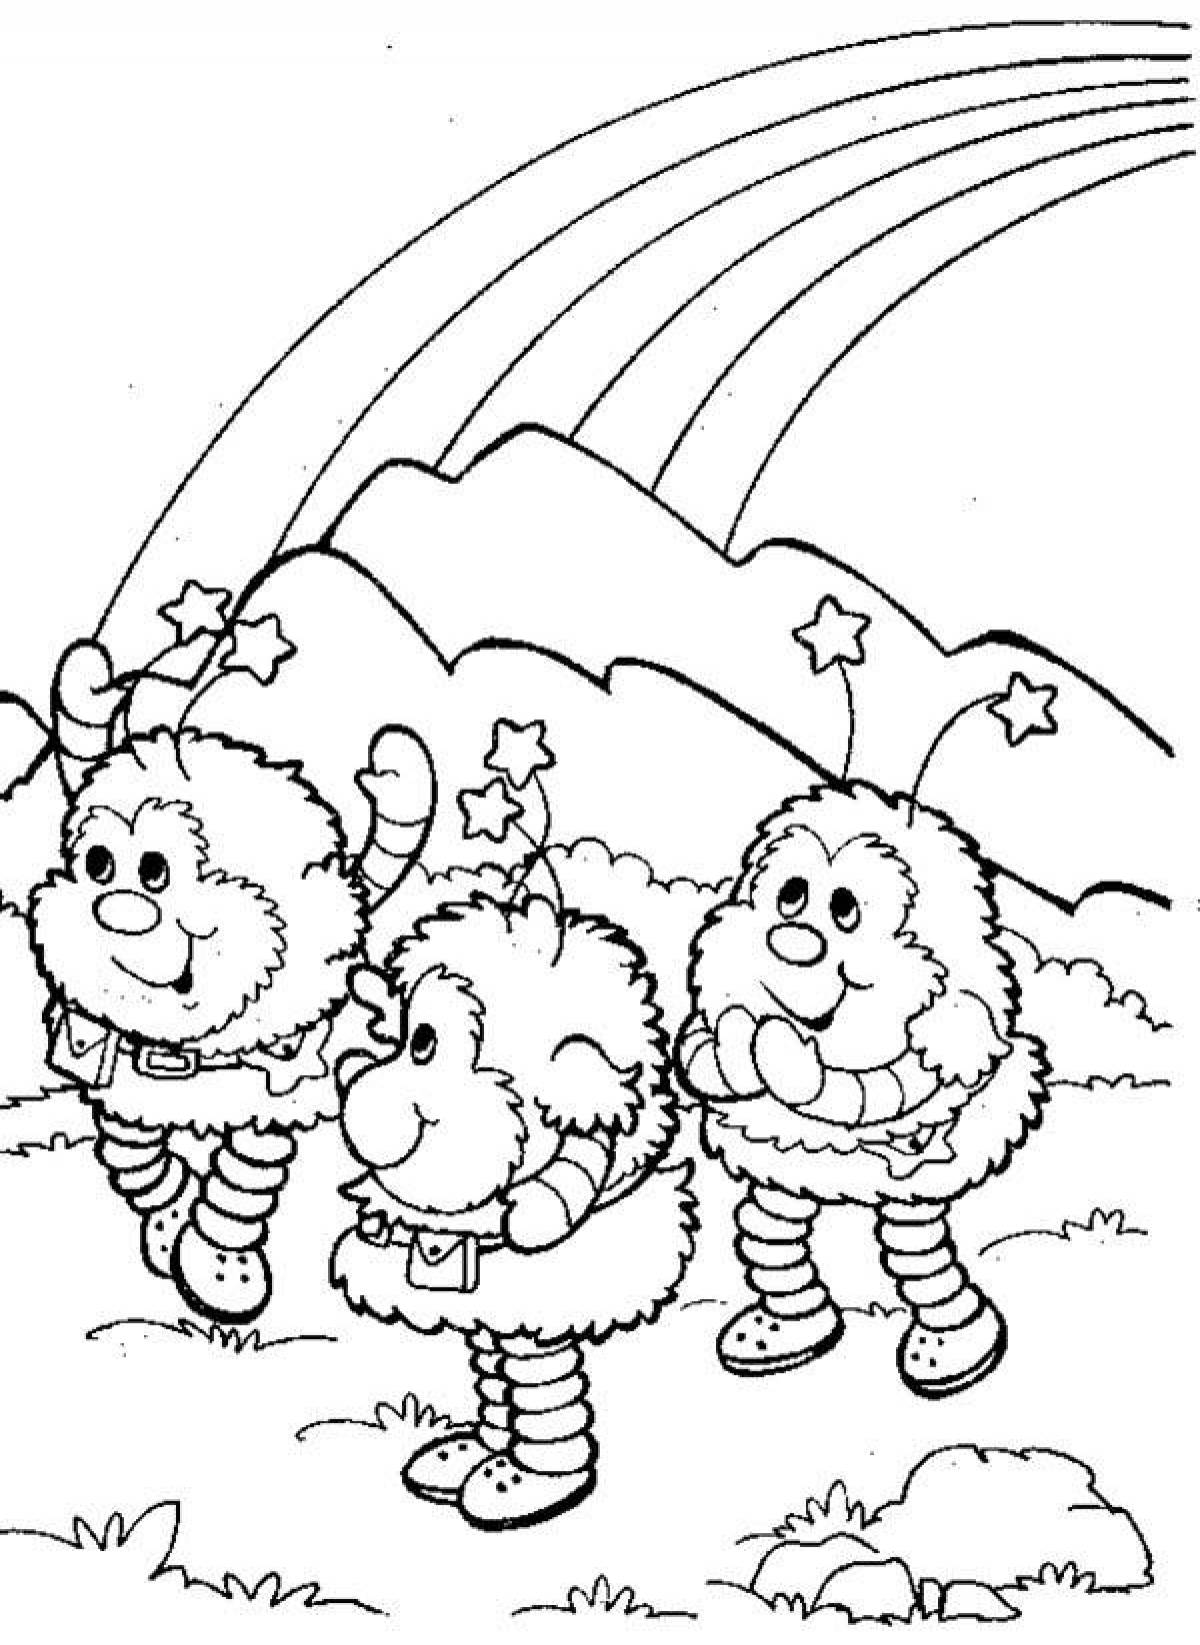 Glitter rainbow friends coloring page